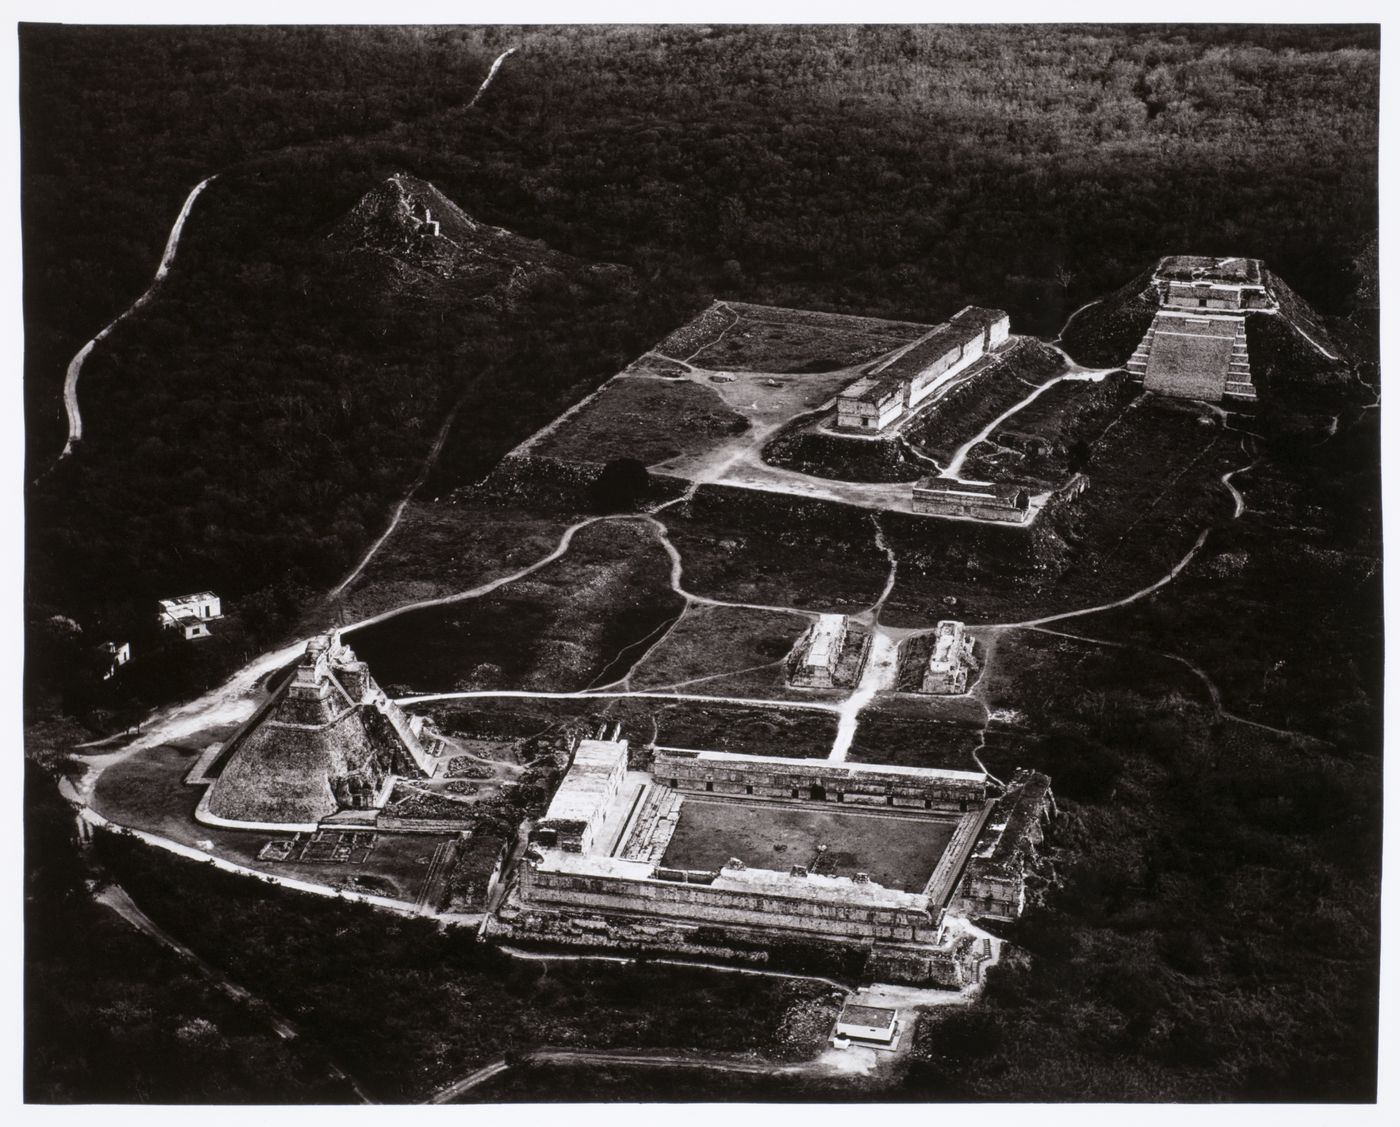 Aerial view of Uxmal Site showing the Nunnery Quadrangle, Pyramid of the Magician, Ballcourt, House of Turtles, Palace of the Governor and the Great Pyramid, Yucatán, Mexico